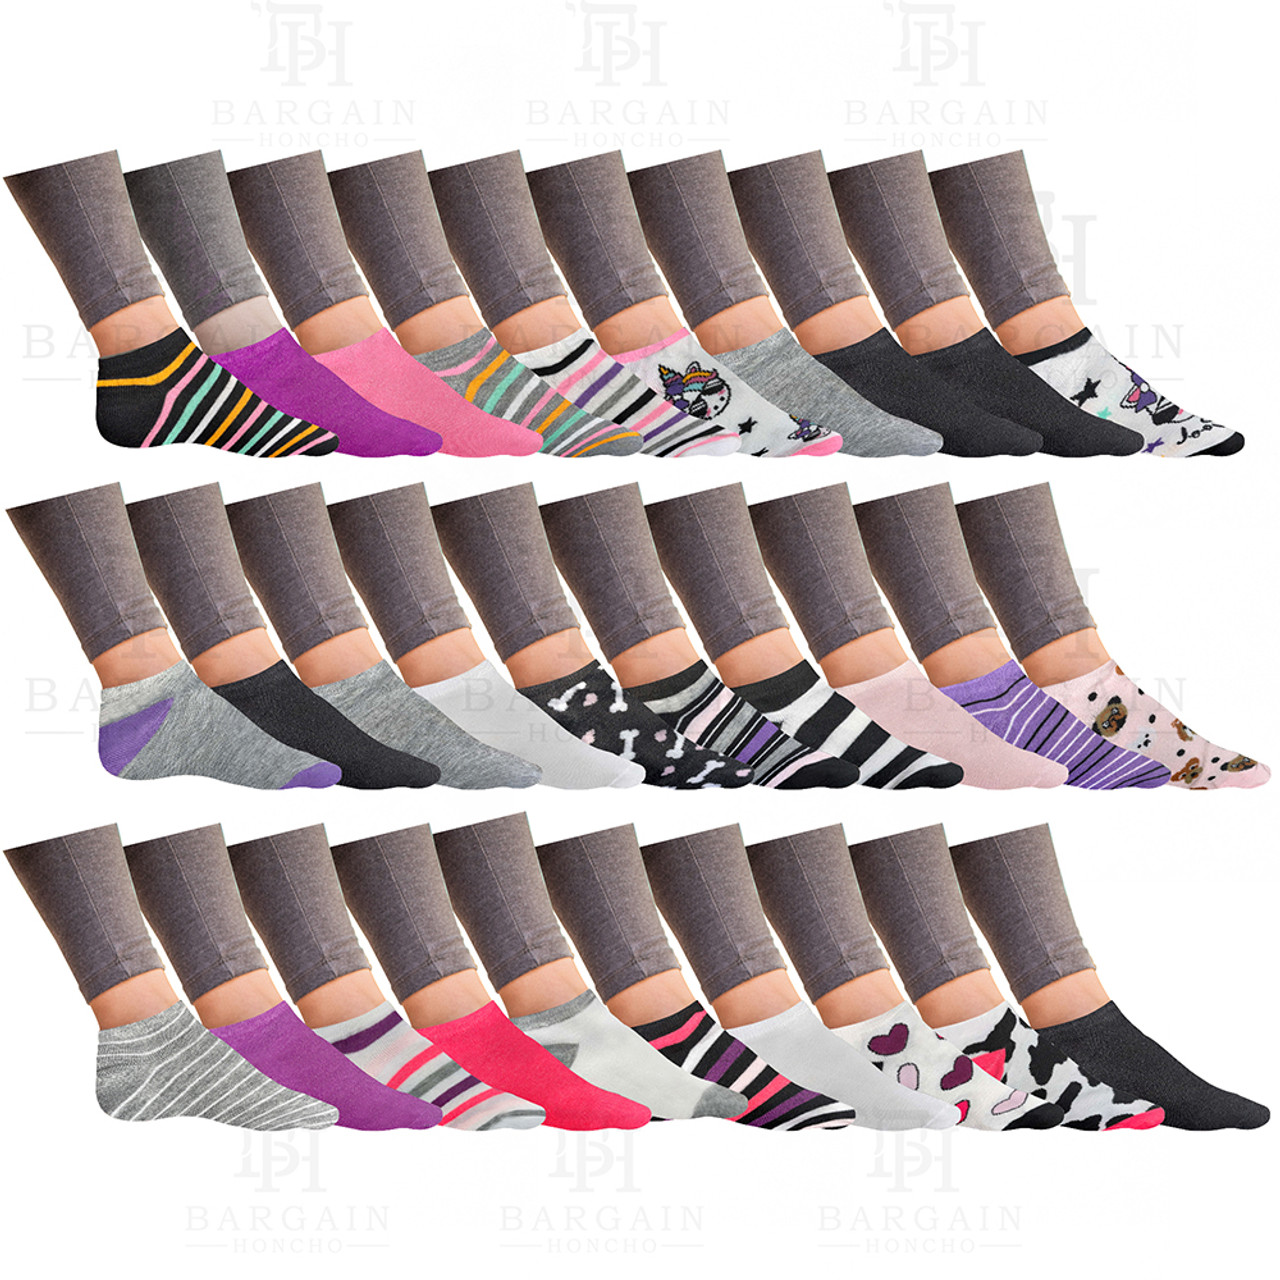 Women’s Breathable Colorful No-Show Low-Cut Ankle Socks (20- or 50-Pairs) product image